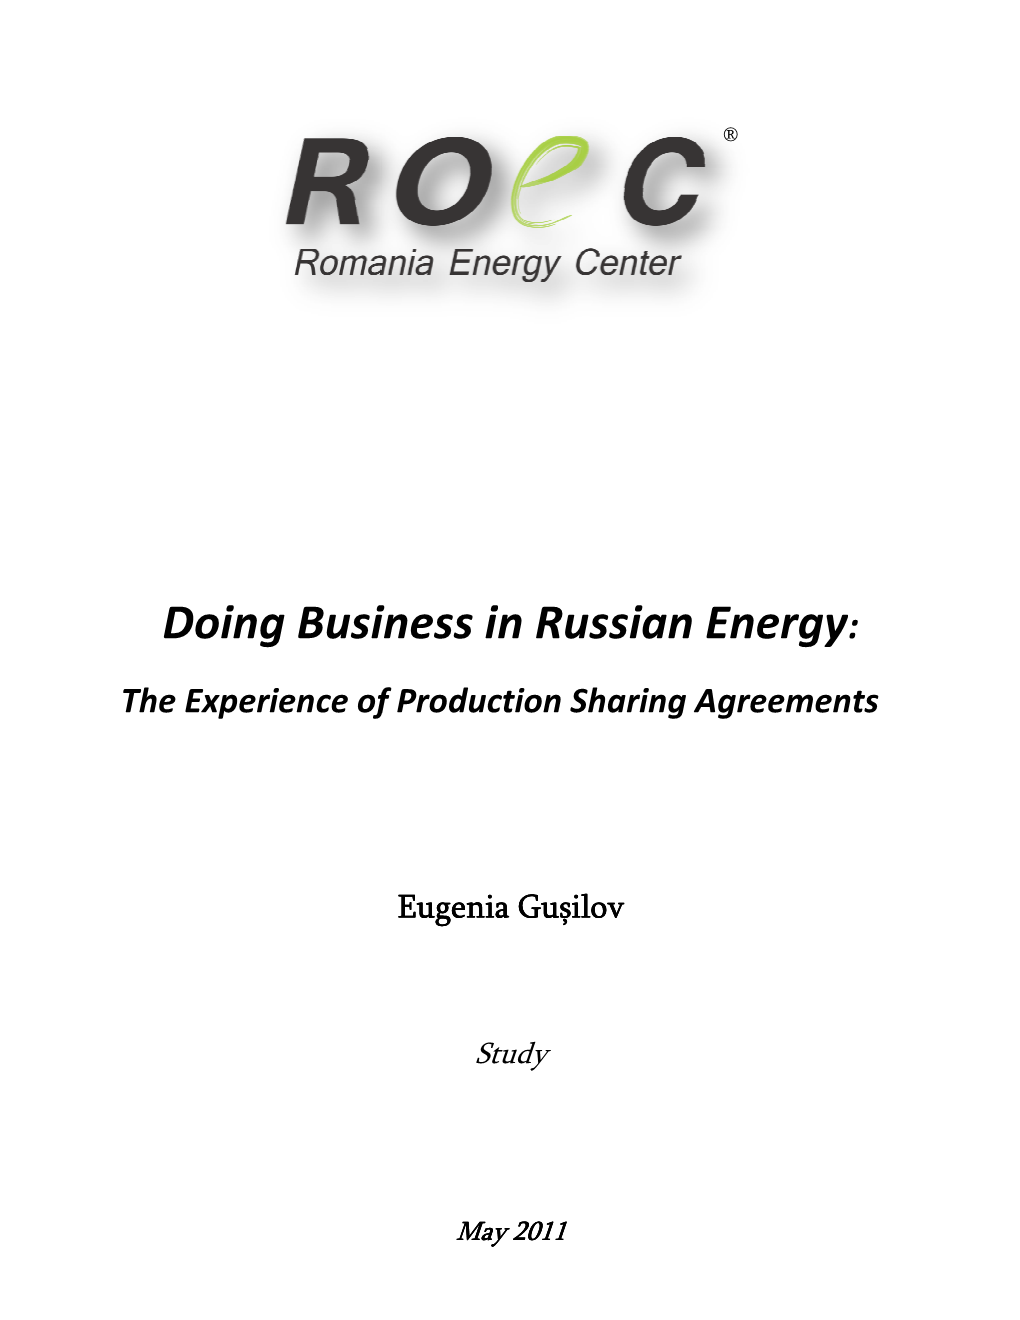 Doing Business in Russian Energy: the Experience of Production Sharing Agreements